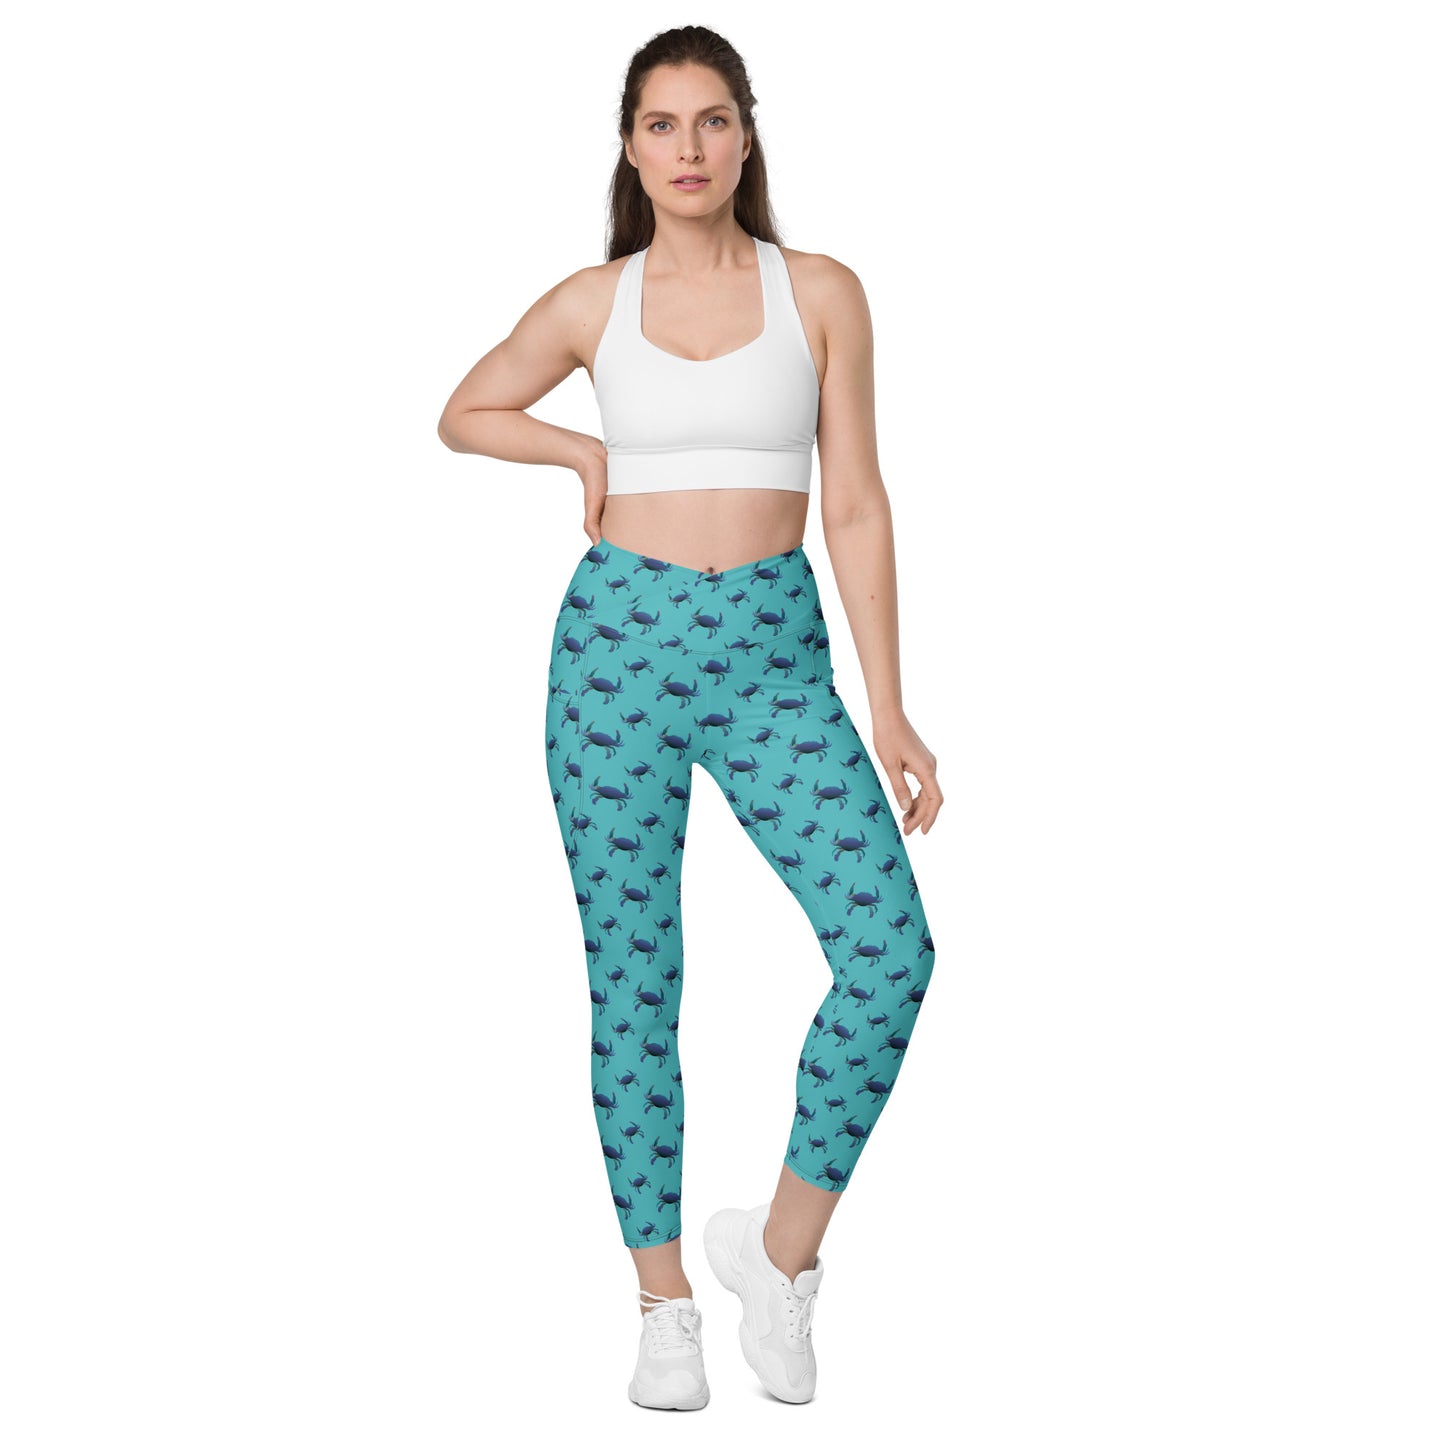 Blue Green ombré Bushels of Fun Crossover leggings with pockets